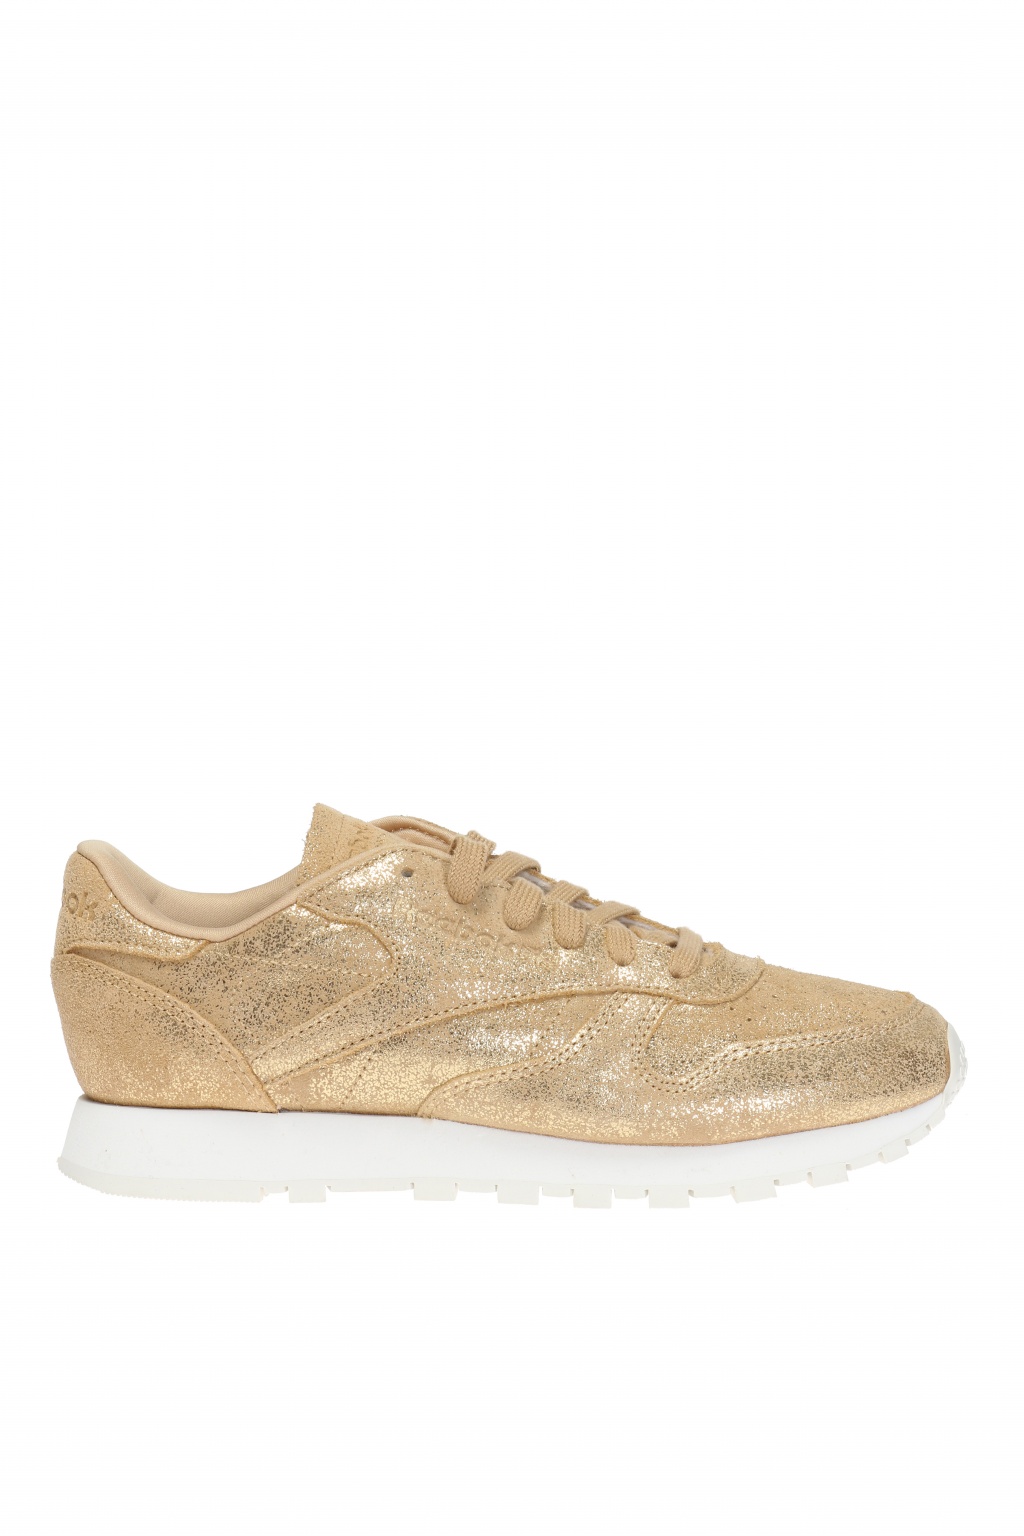 reebok classic leather shimmer gold